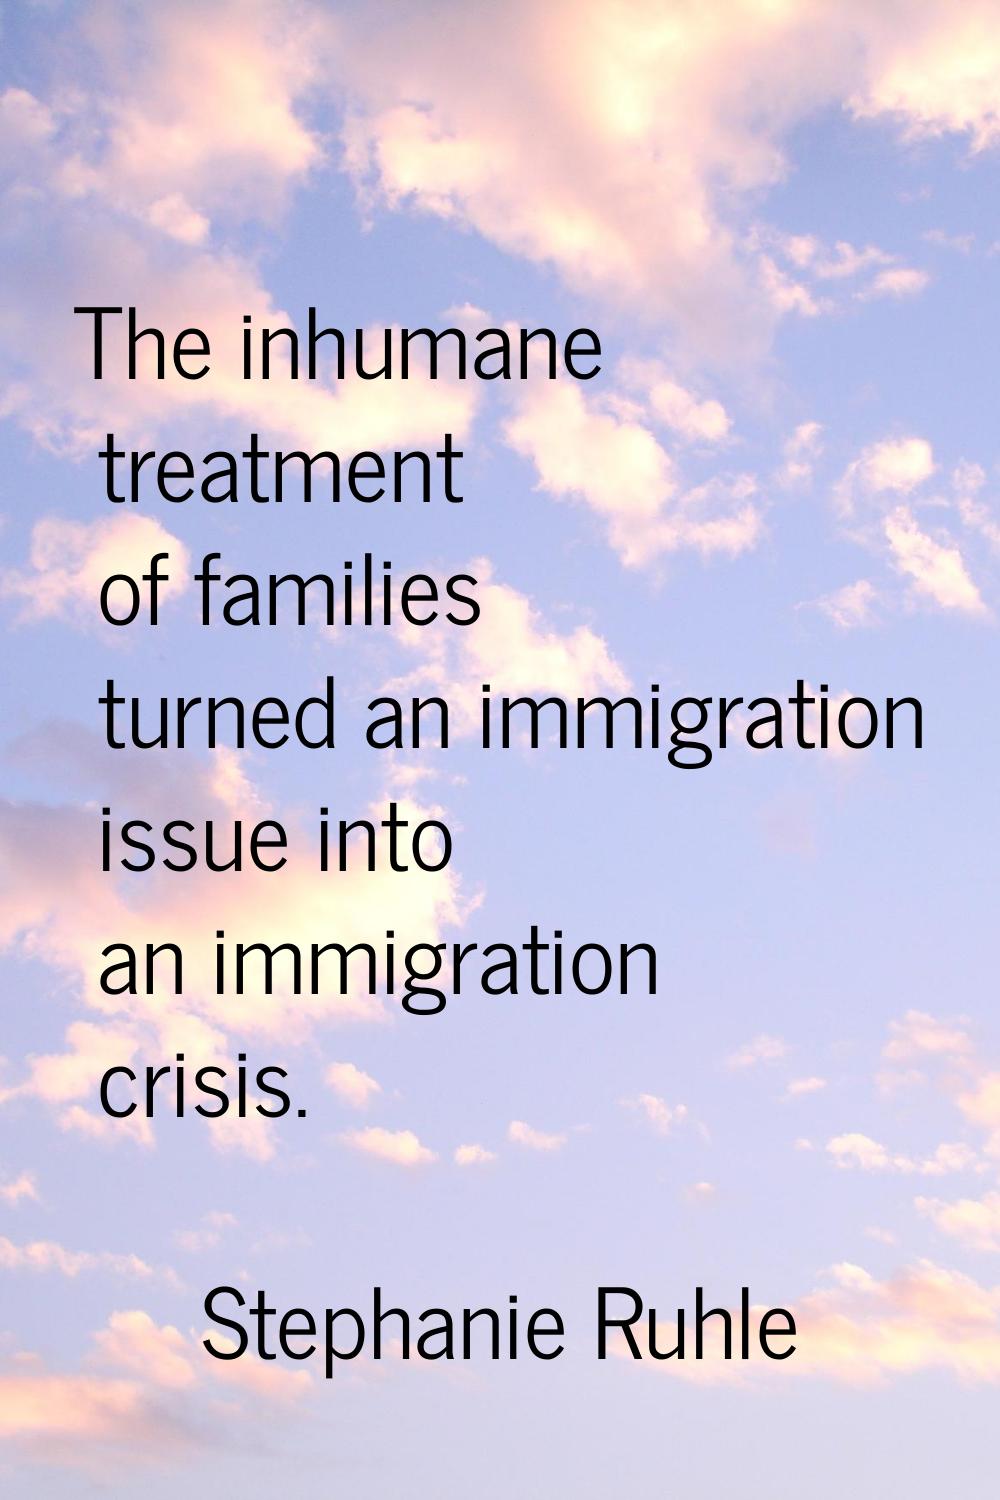 The inhumane treatment of families turned an immigration issue into an immigration crisis.